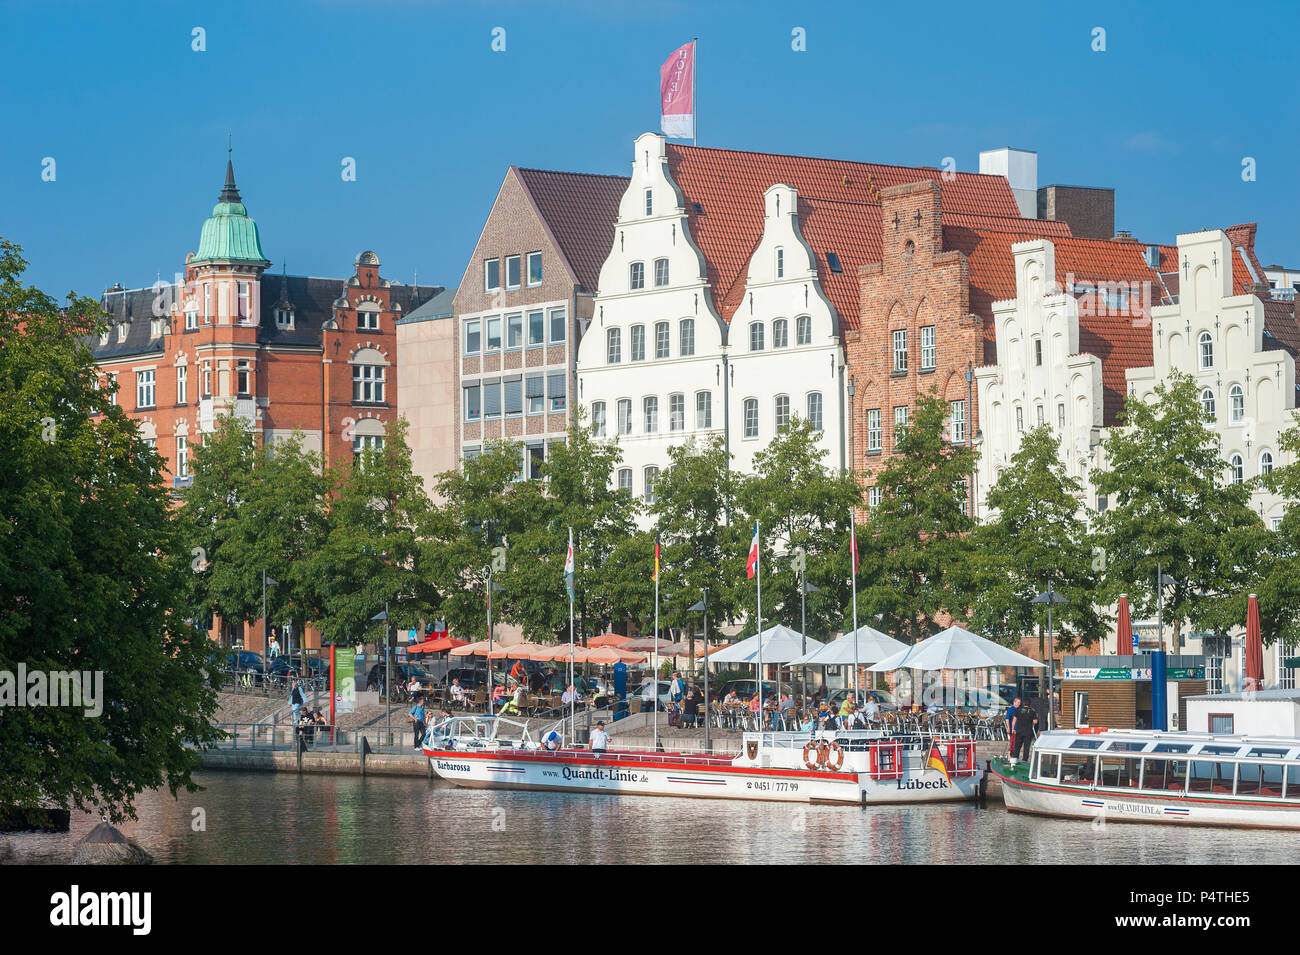 Historic houses, excursion boats on the river Trave, Lübeck, Schleswig-Holstein, Germany Stock Photo